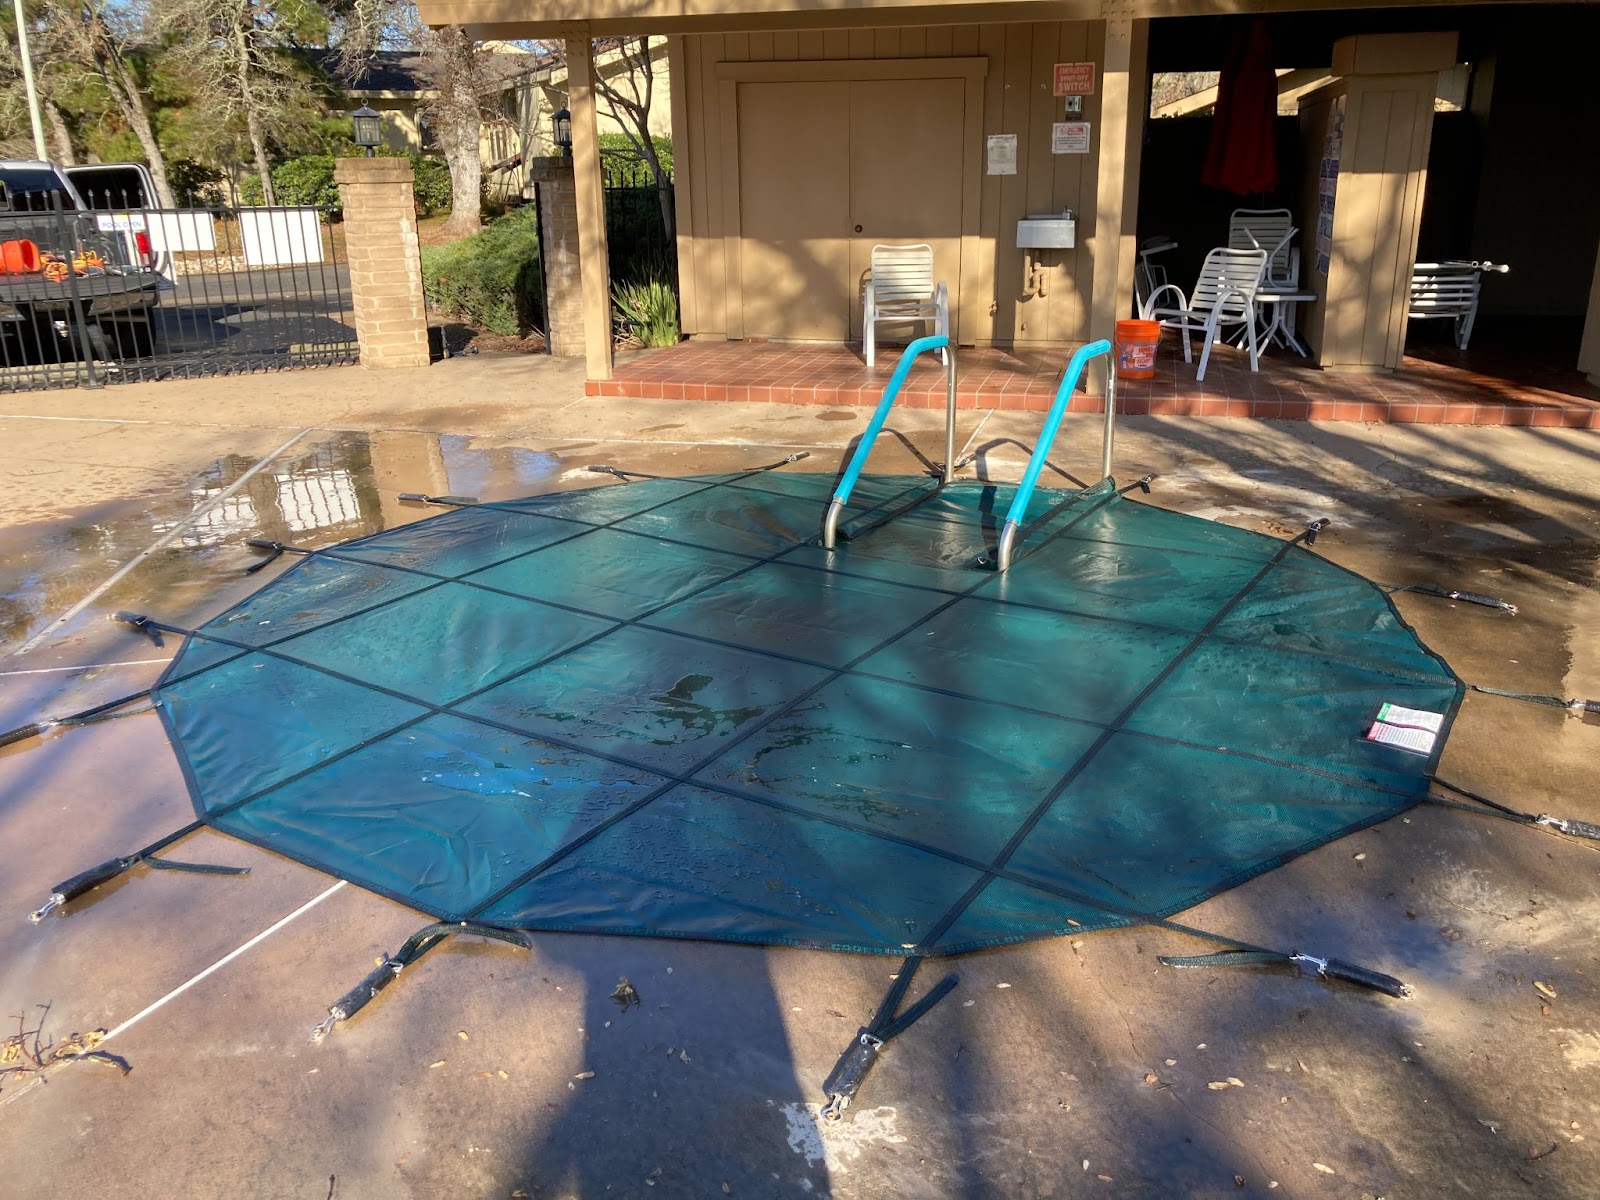 Green pool safety cover installed on a hot tub